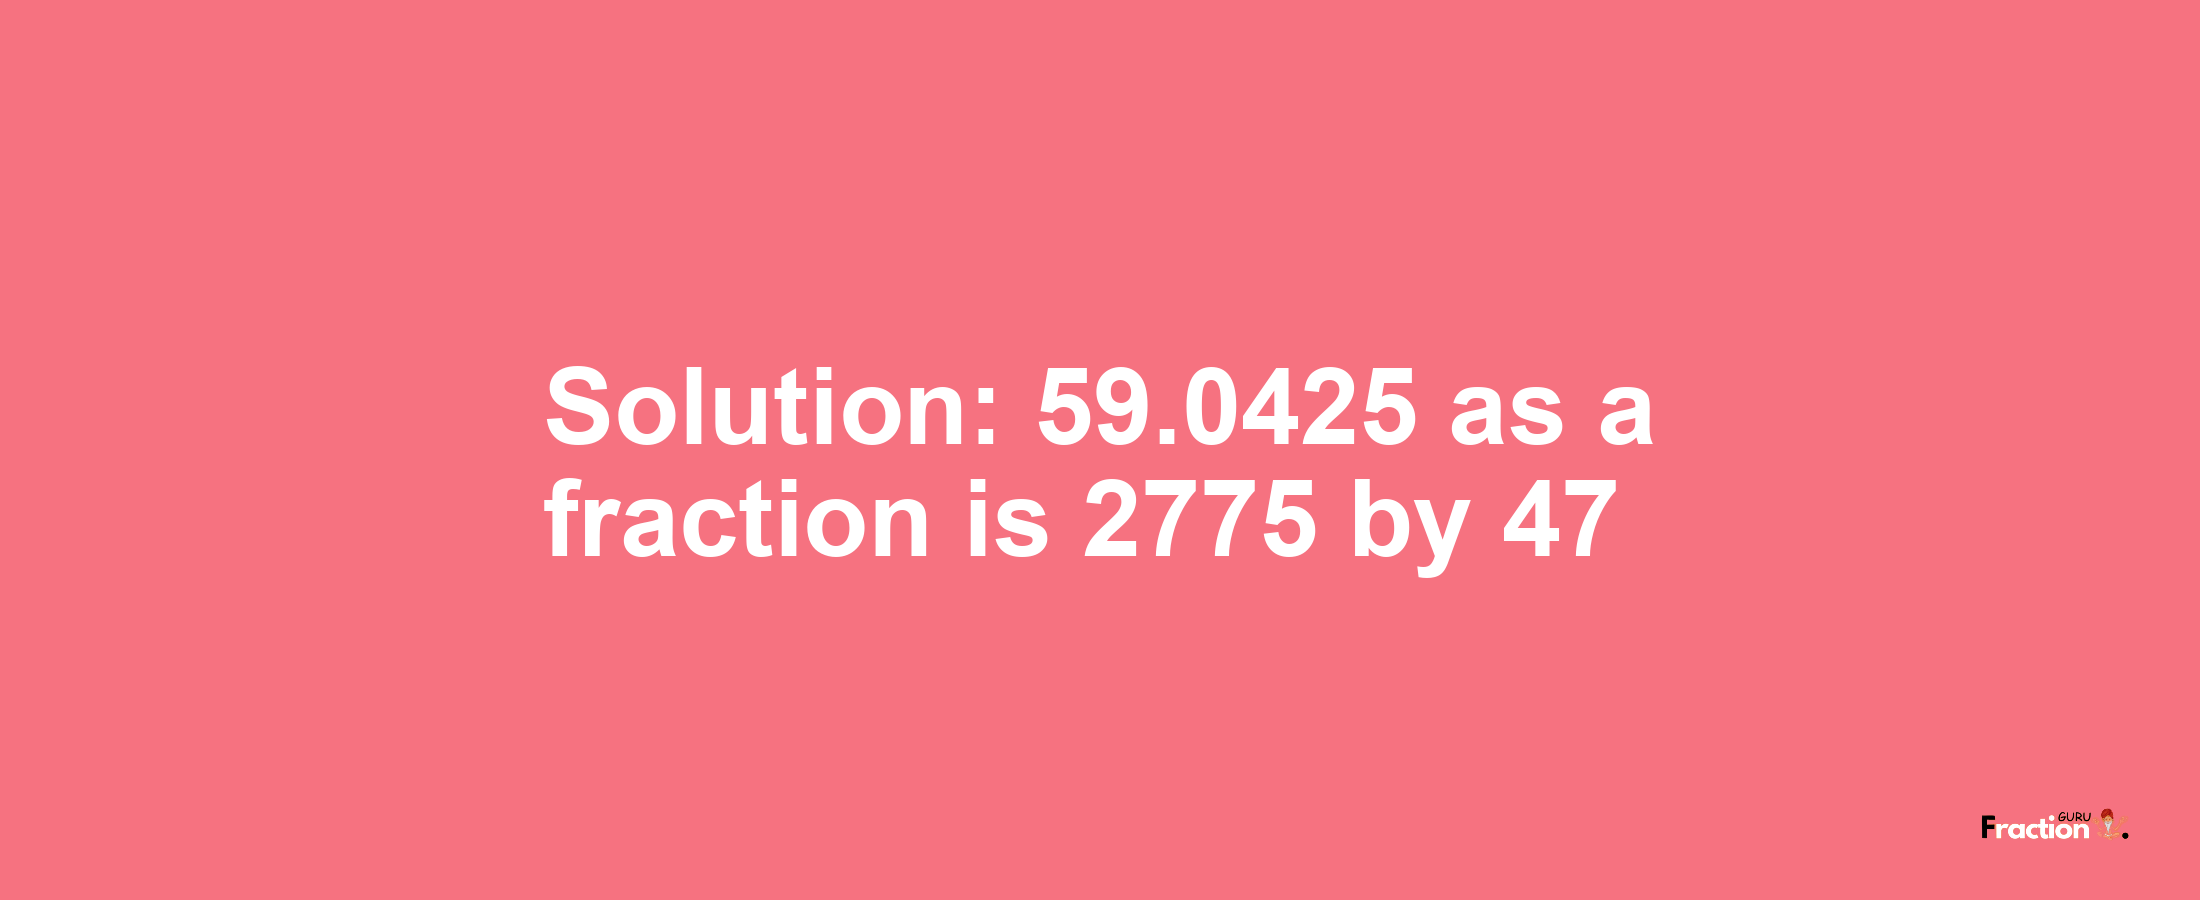 Solution:59.0425 as a fraction is 2775/47